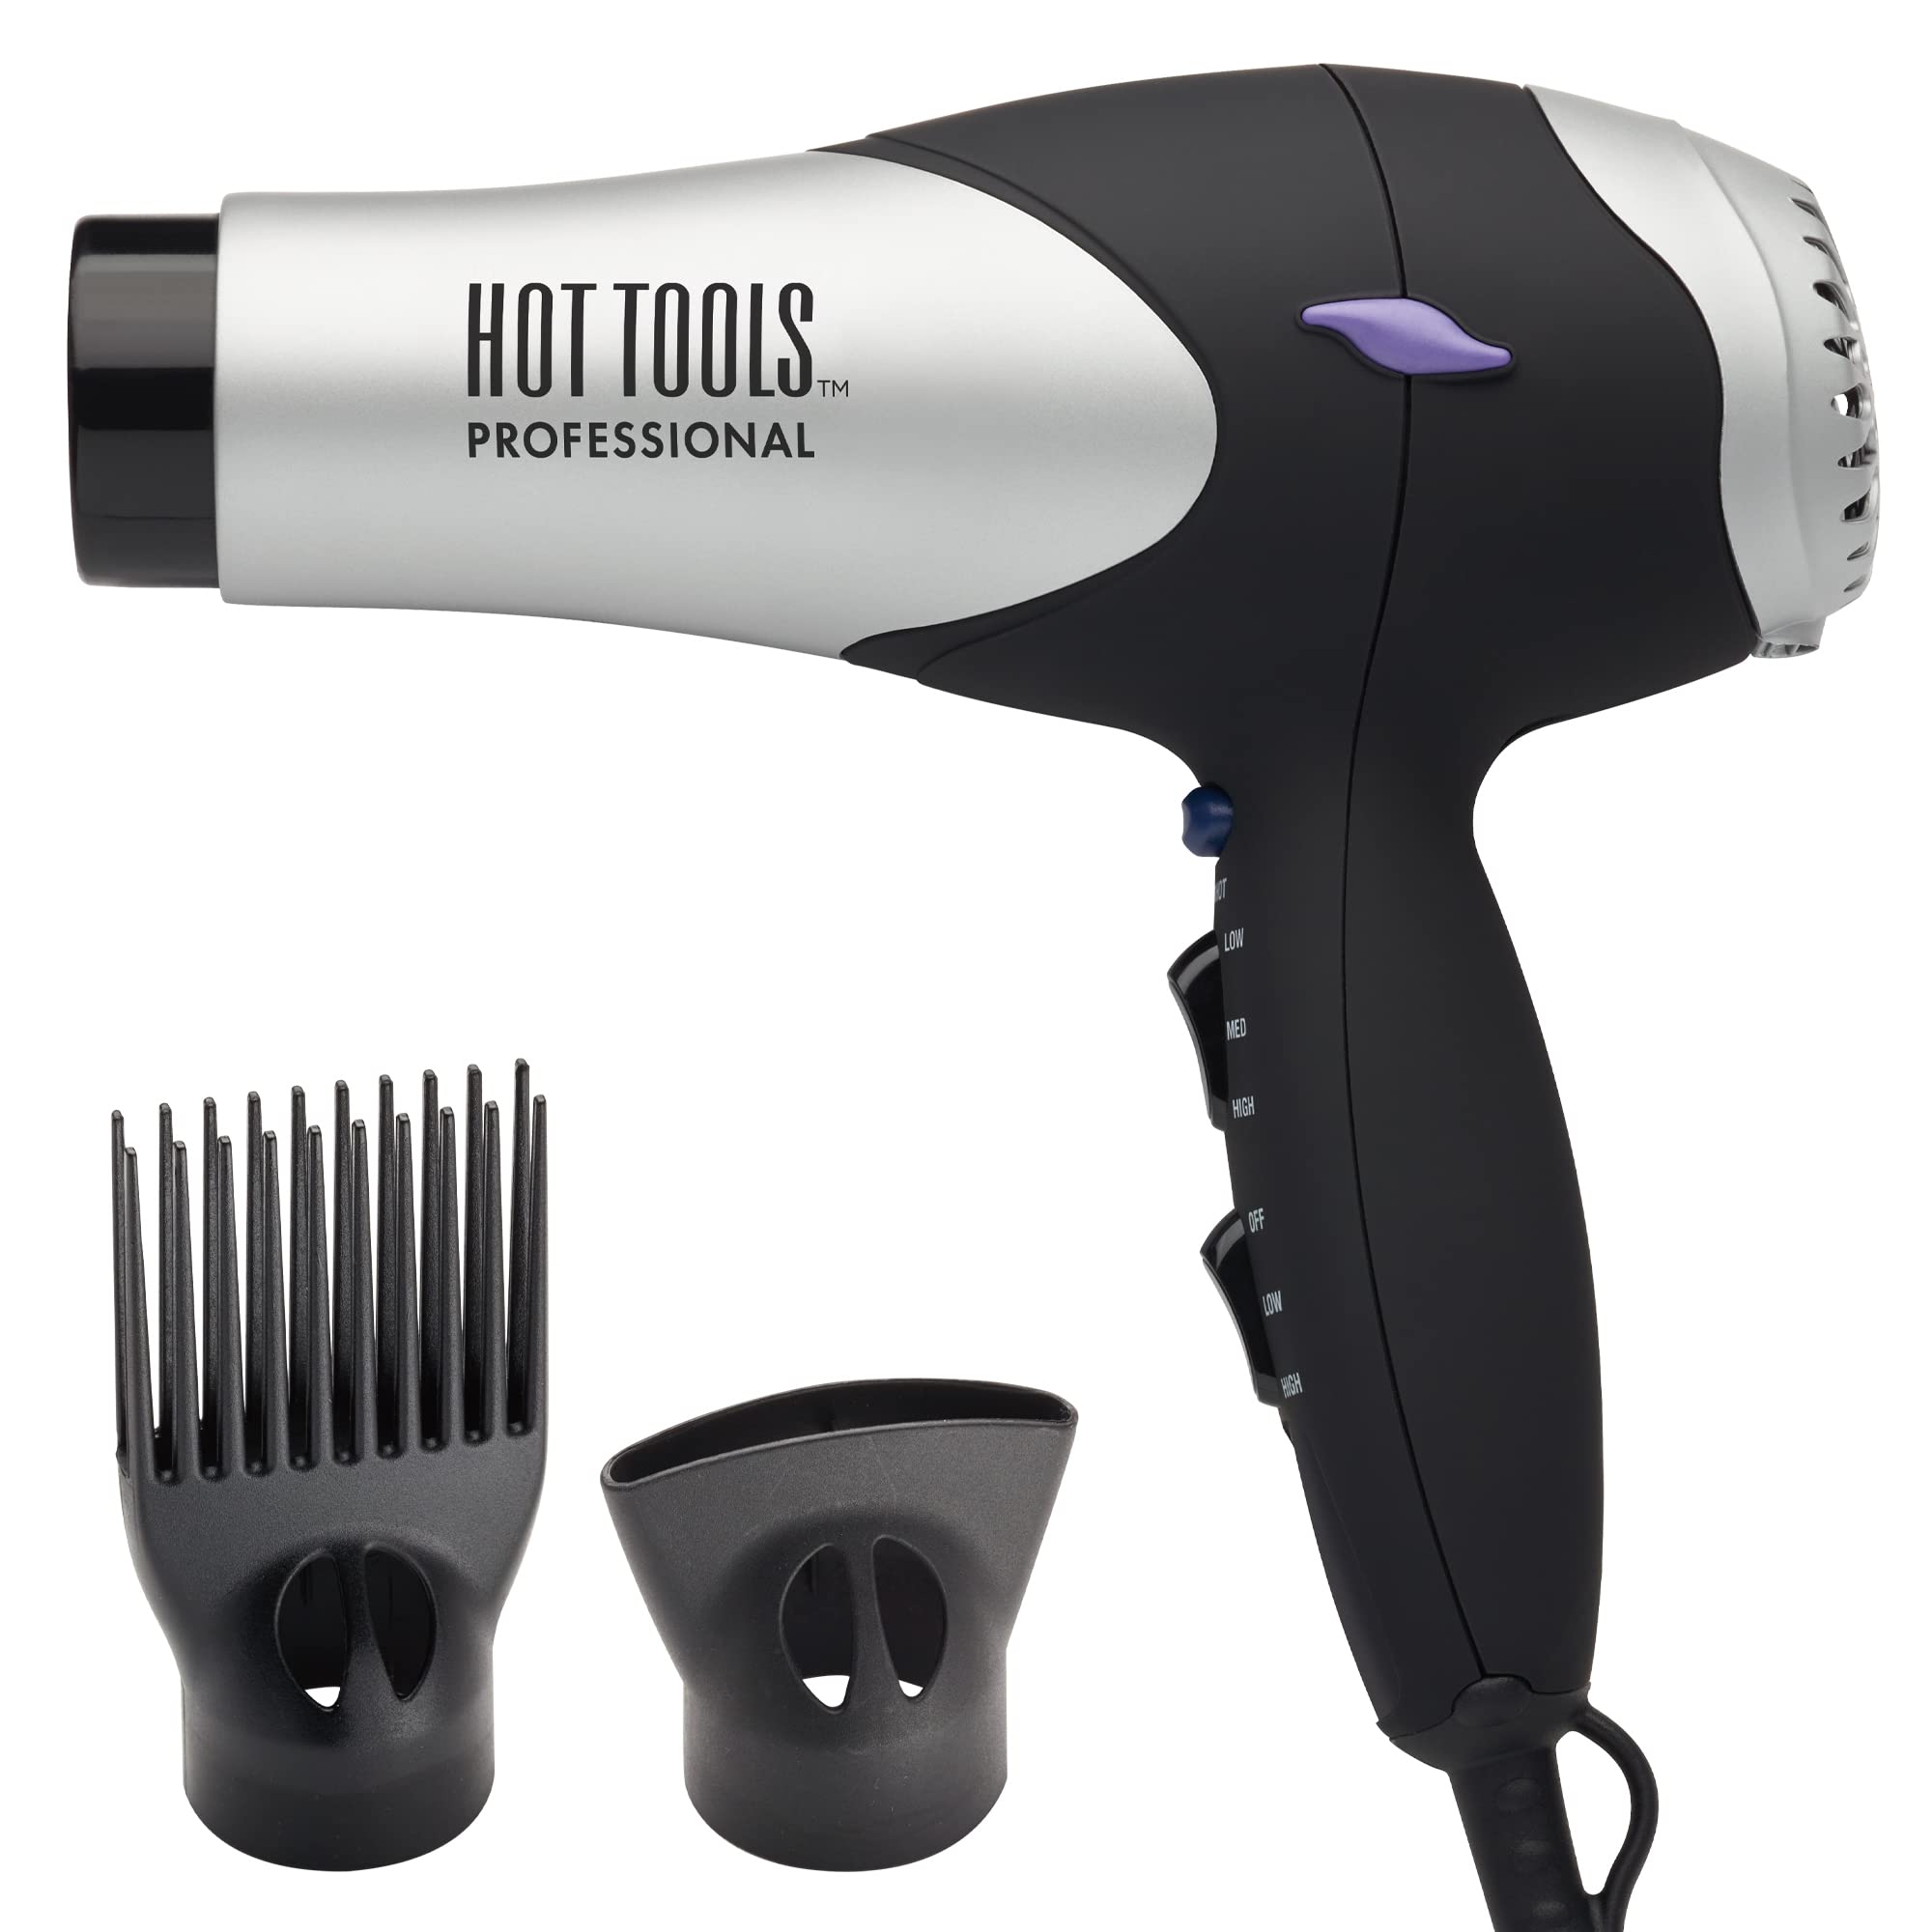 Hot Tools Pro Artist Turbo Styling Hair Dryer | Lightweight and Quiet, Silver/Black, 1 Count (Pack of 1)